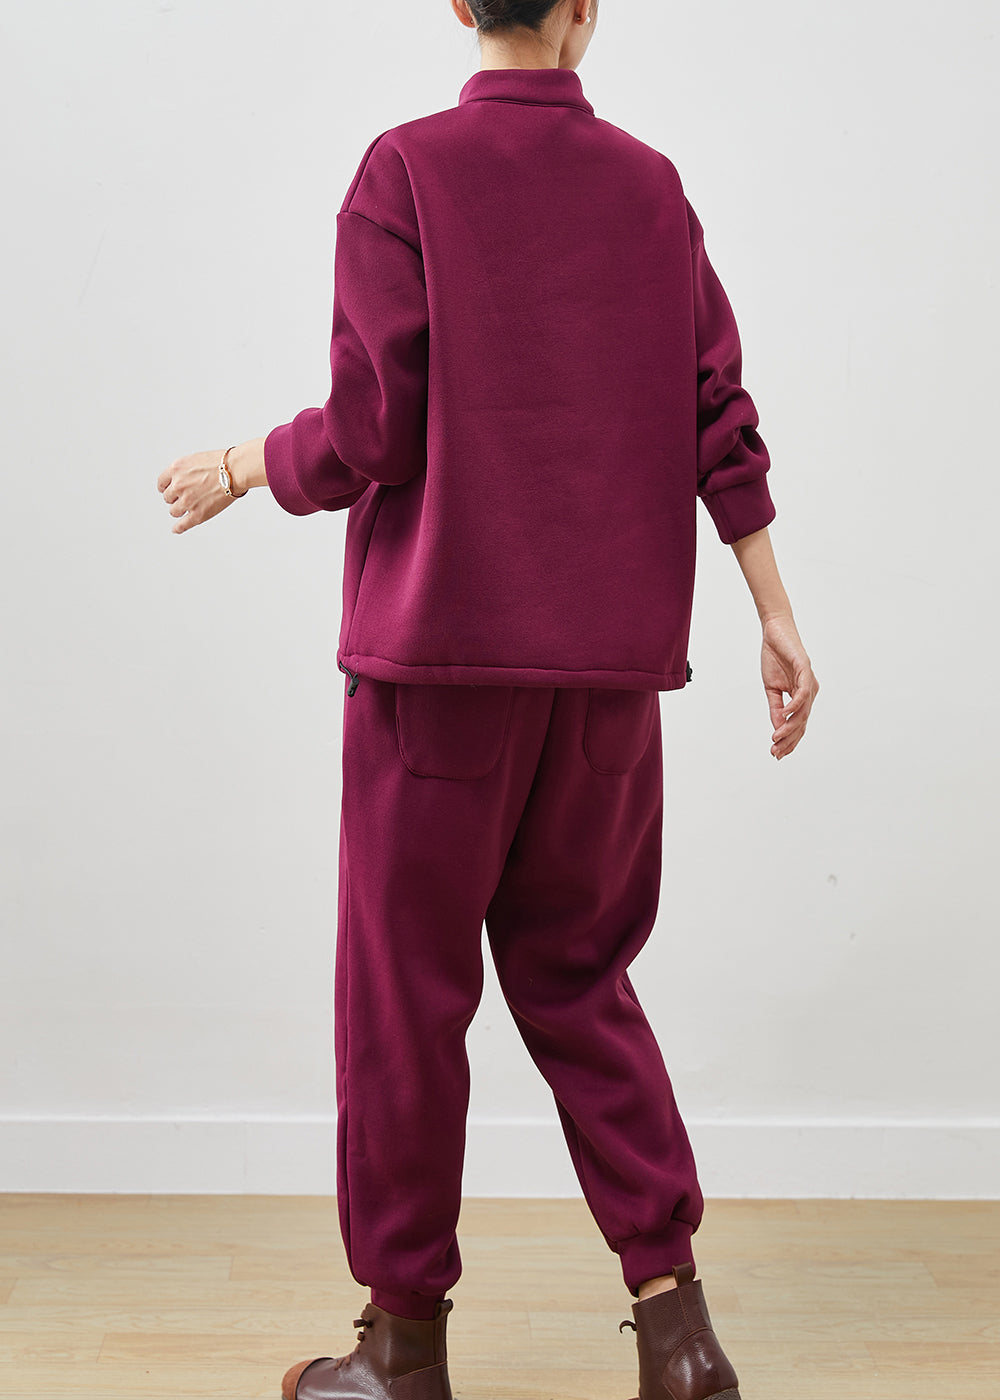 French Dull Purple Oversized Warm Fleece Two Pieces Set Winter